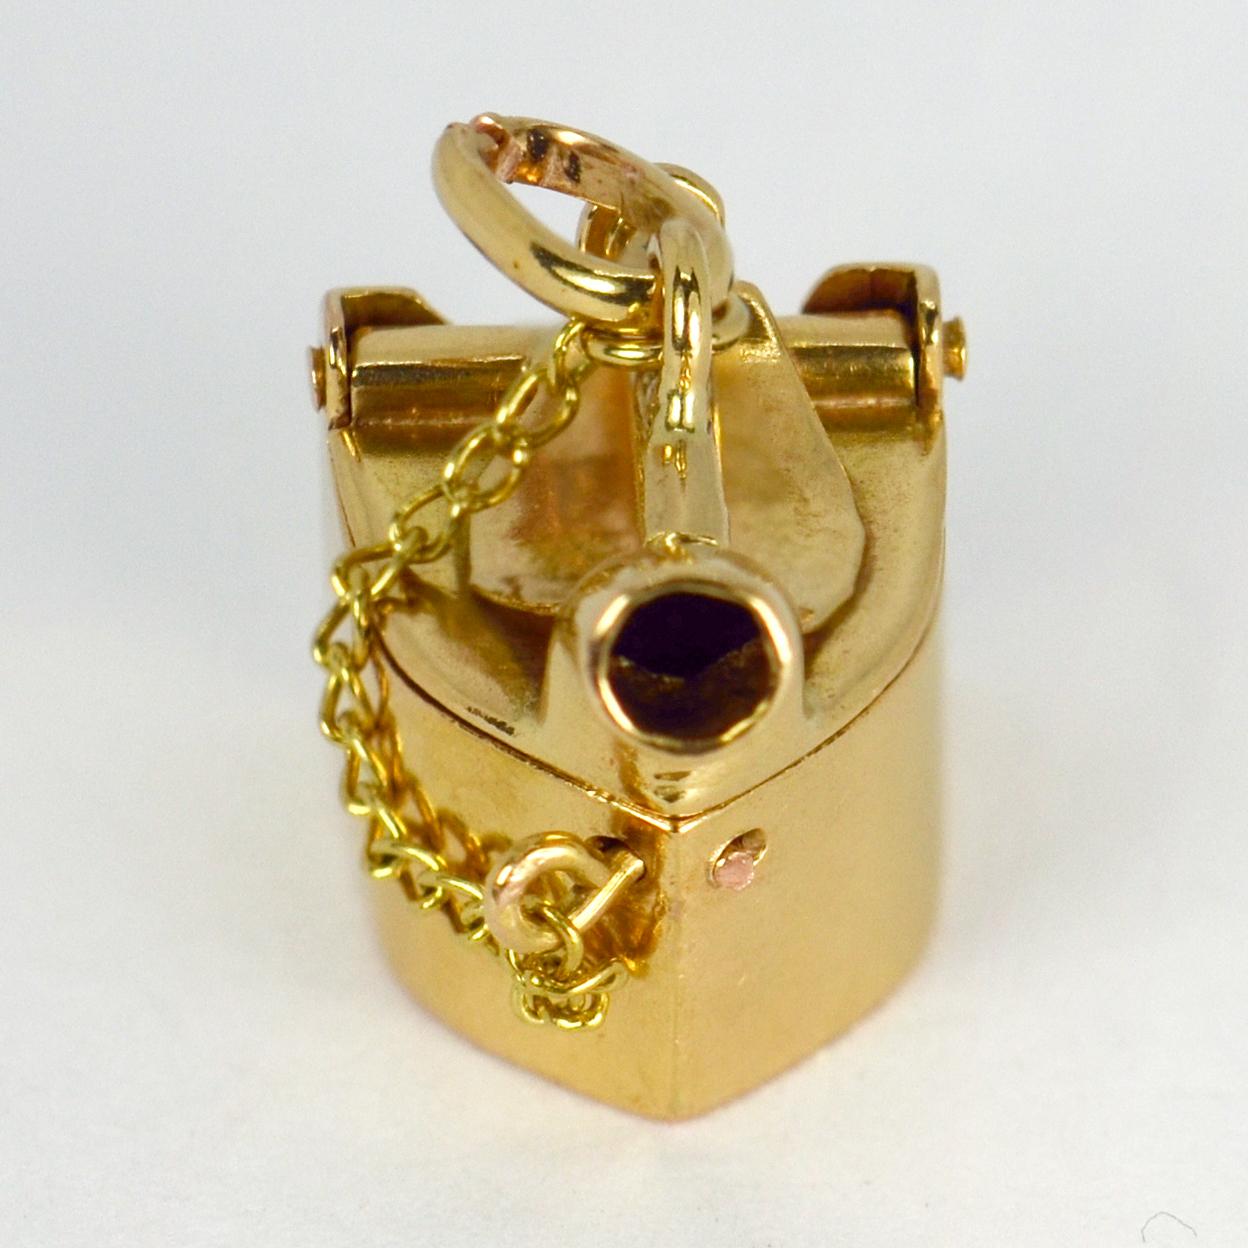 An 18 karat (18K) yellow gold charm pendant designed as an old fashioned steam iron. Unmarked but tested for 18 karat gold. 

Dimensions: 1.45 x 1 x 1.2 cm
Weight: 3.08 grams
